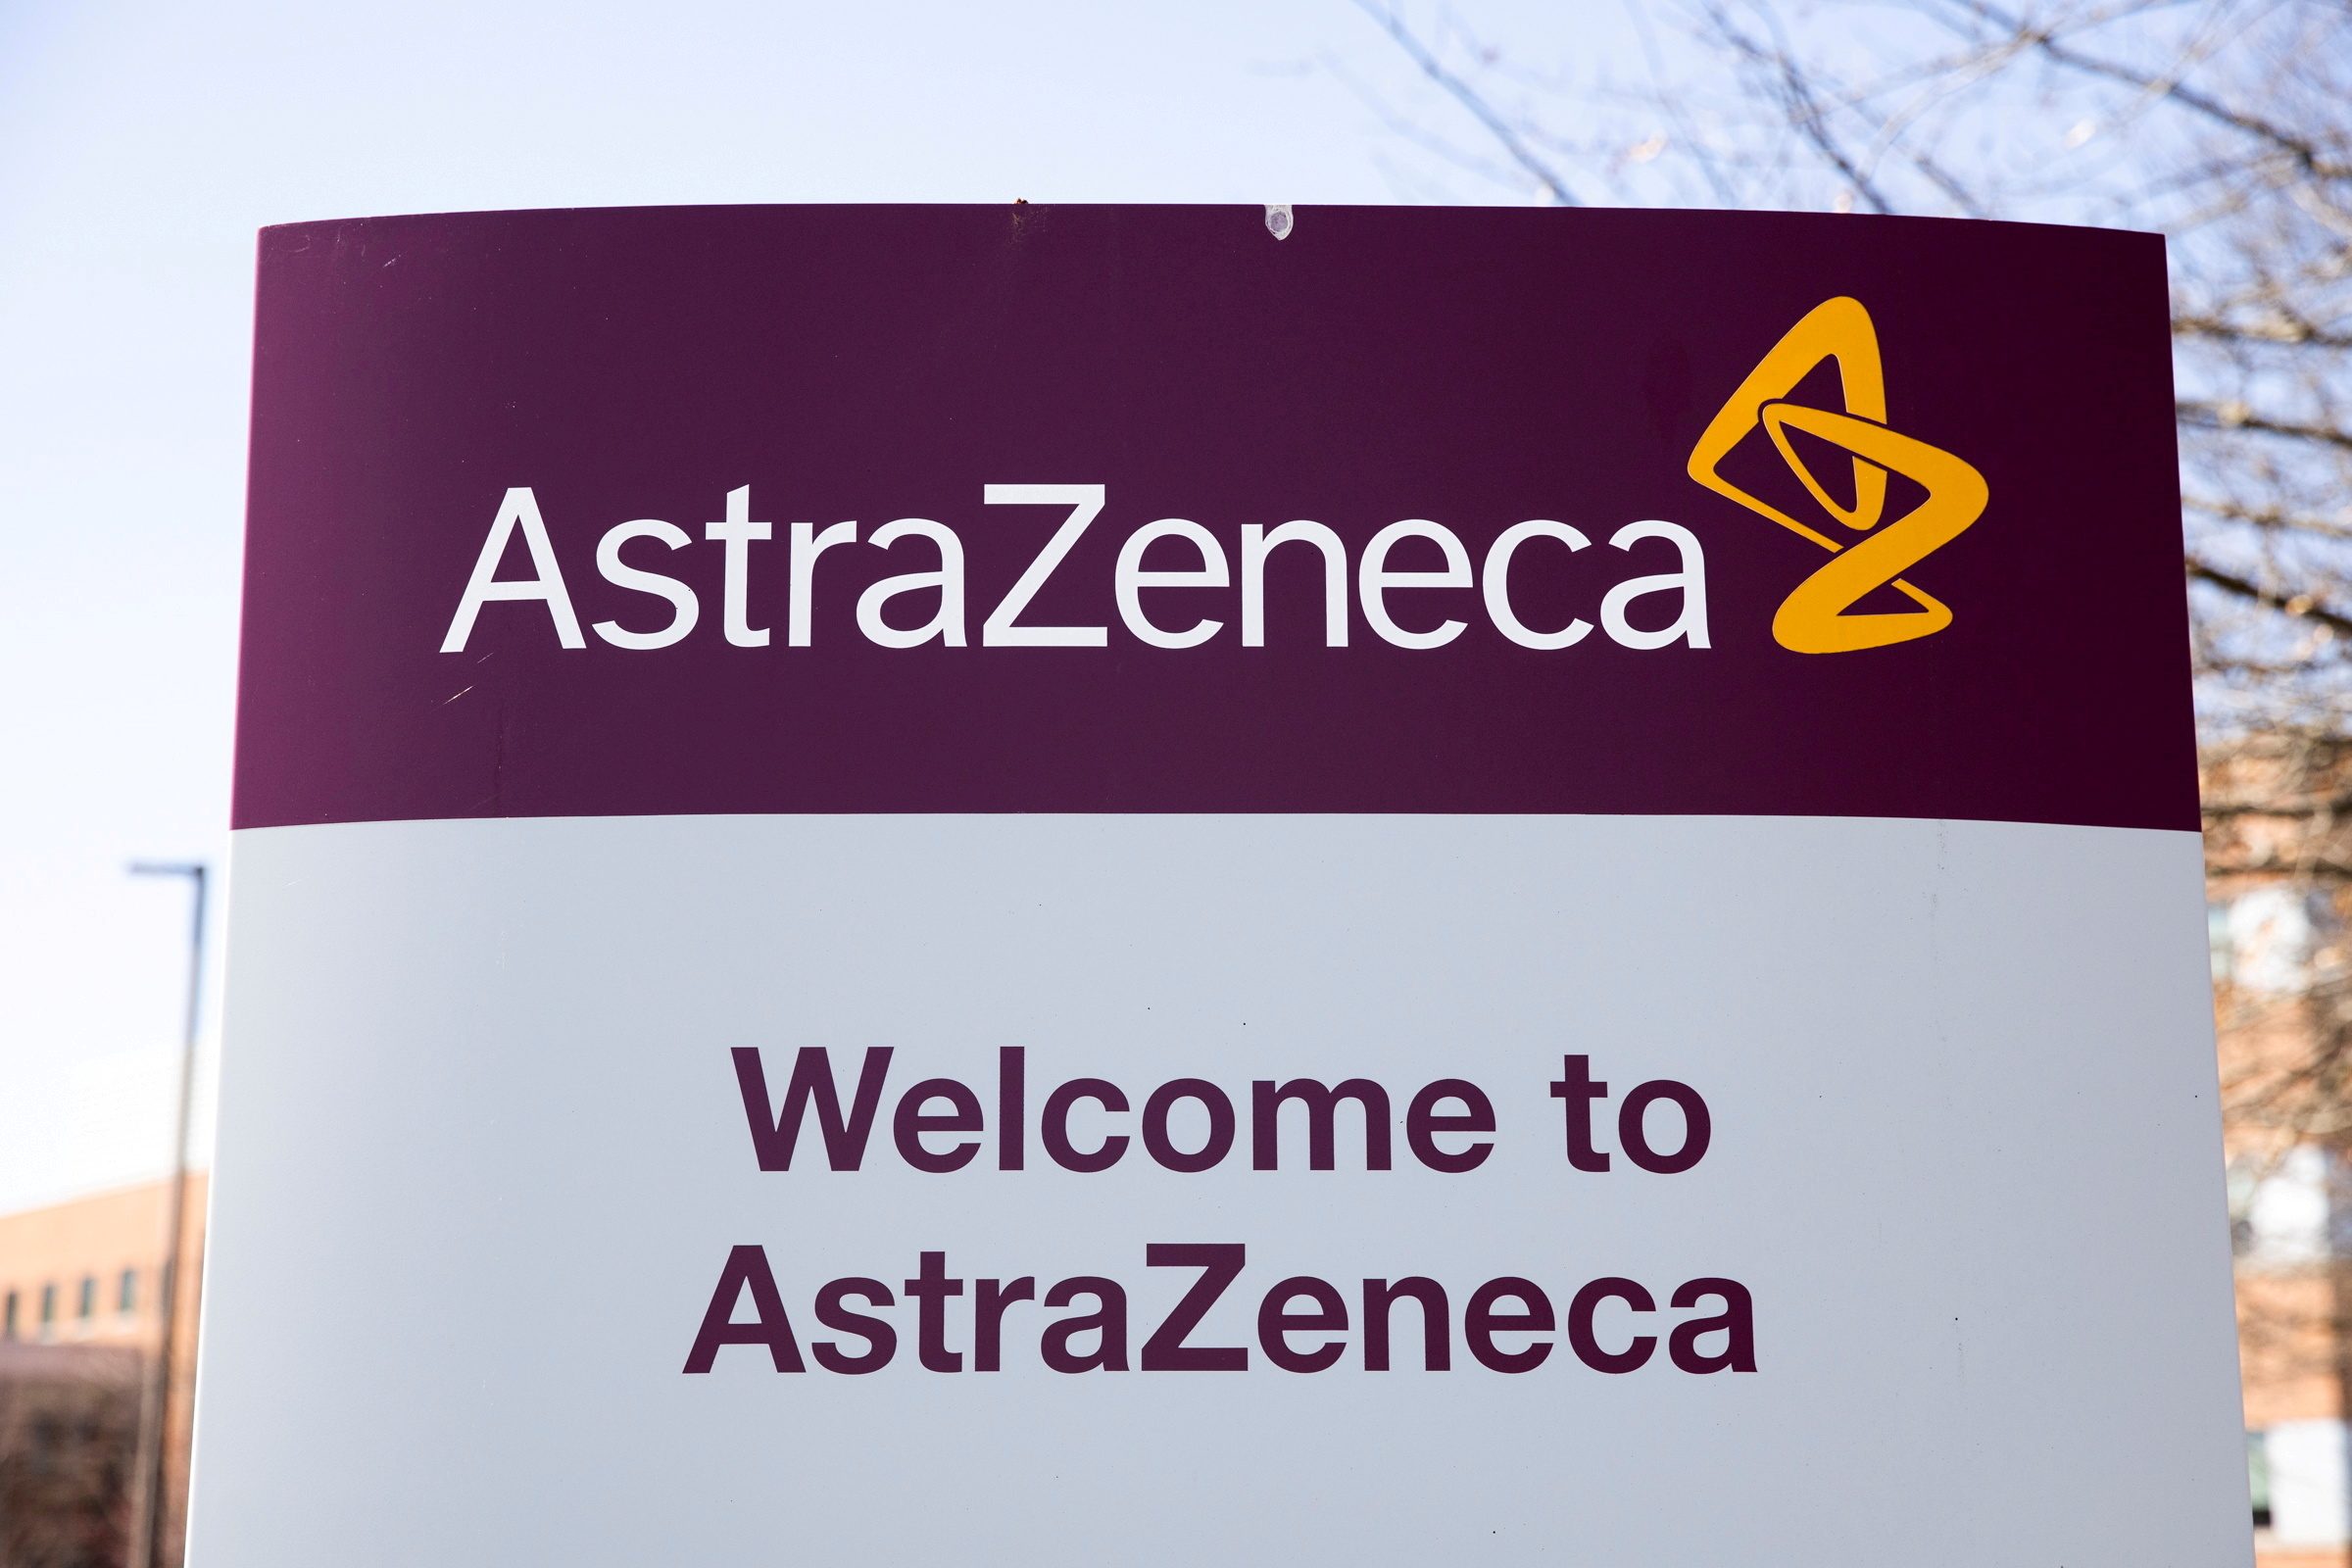 AstraZeneca drug cocktail succeeds in late-stage study to treat COVID-19